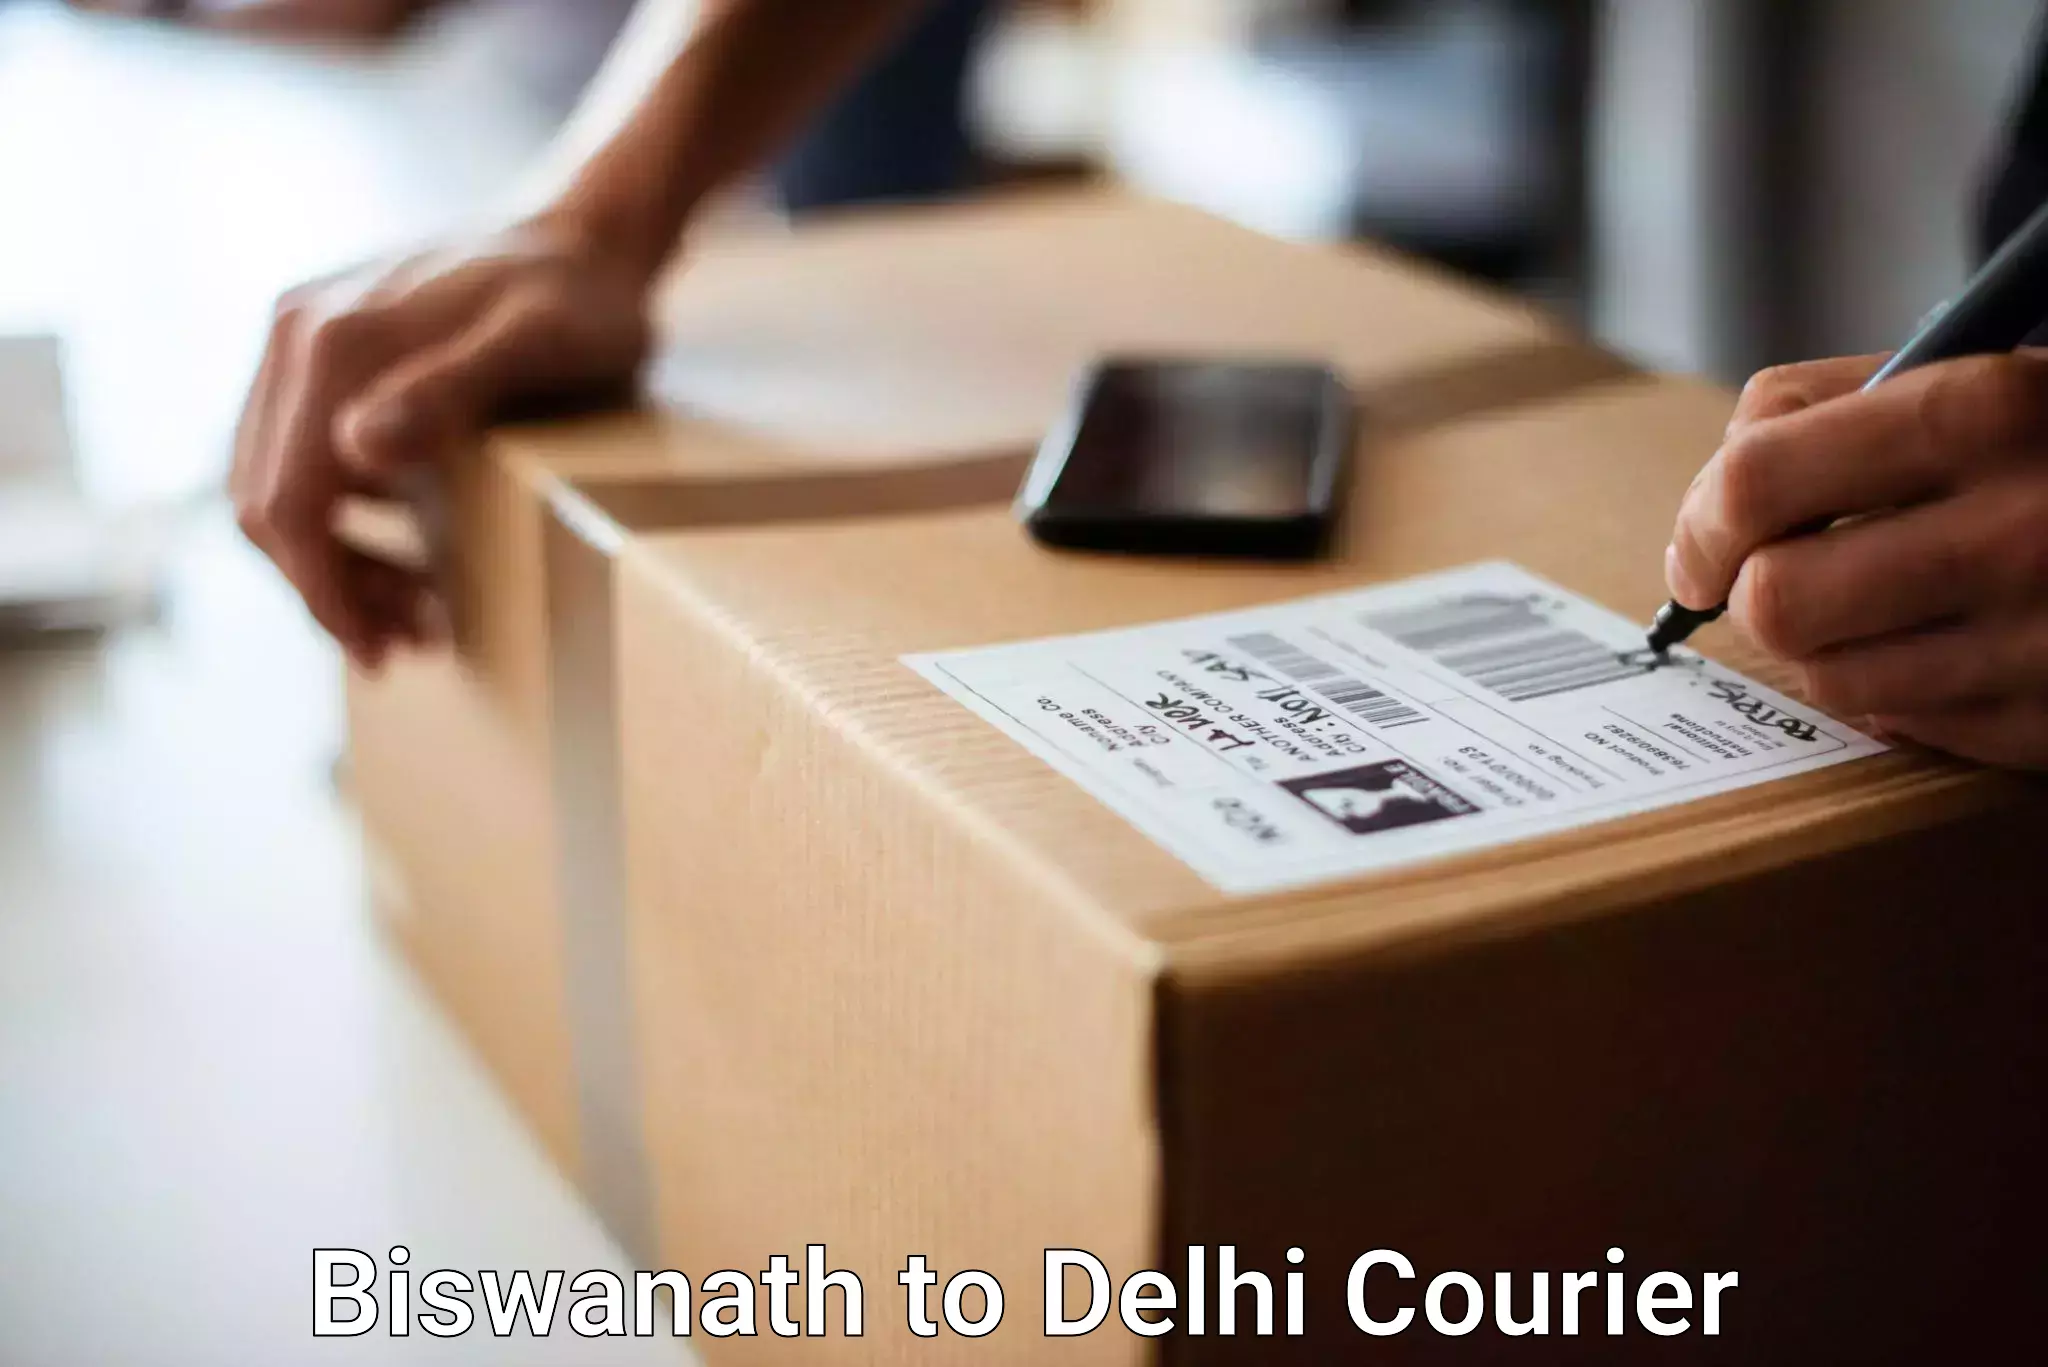 Luggage delivery network Biswanath to NCR